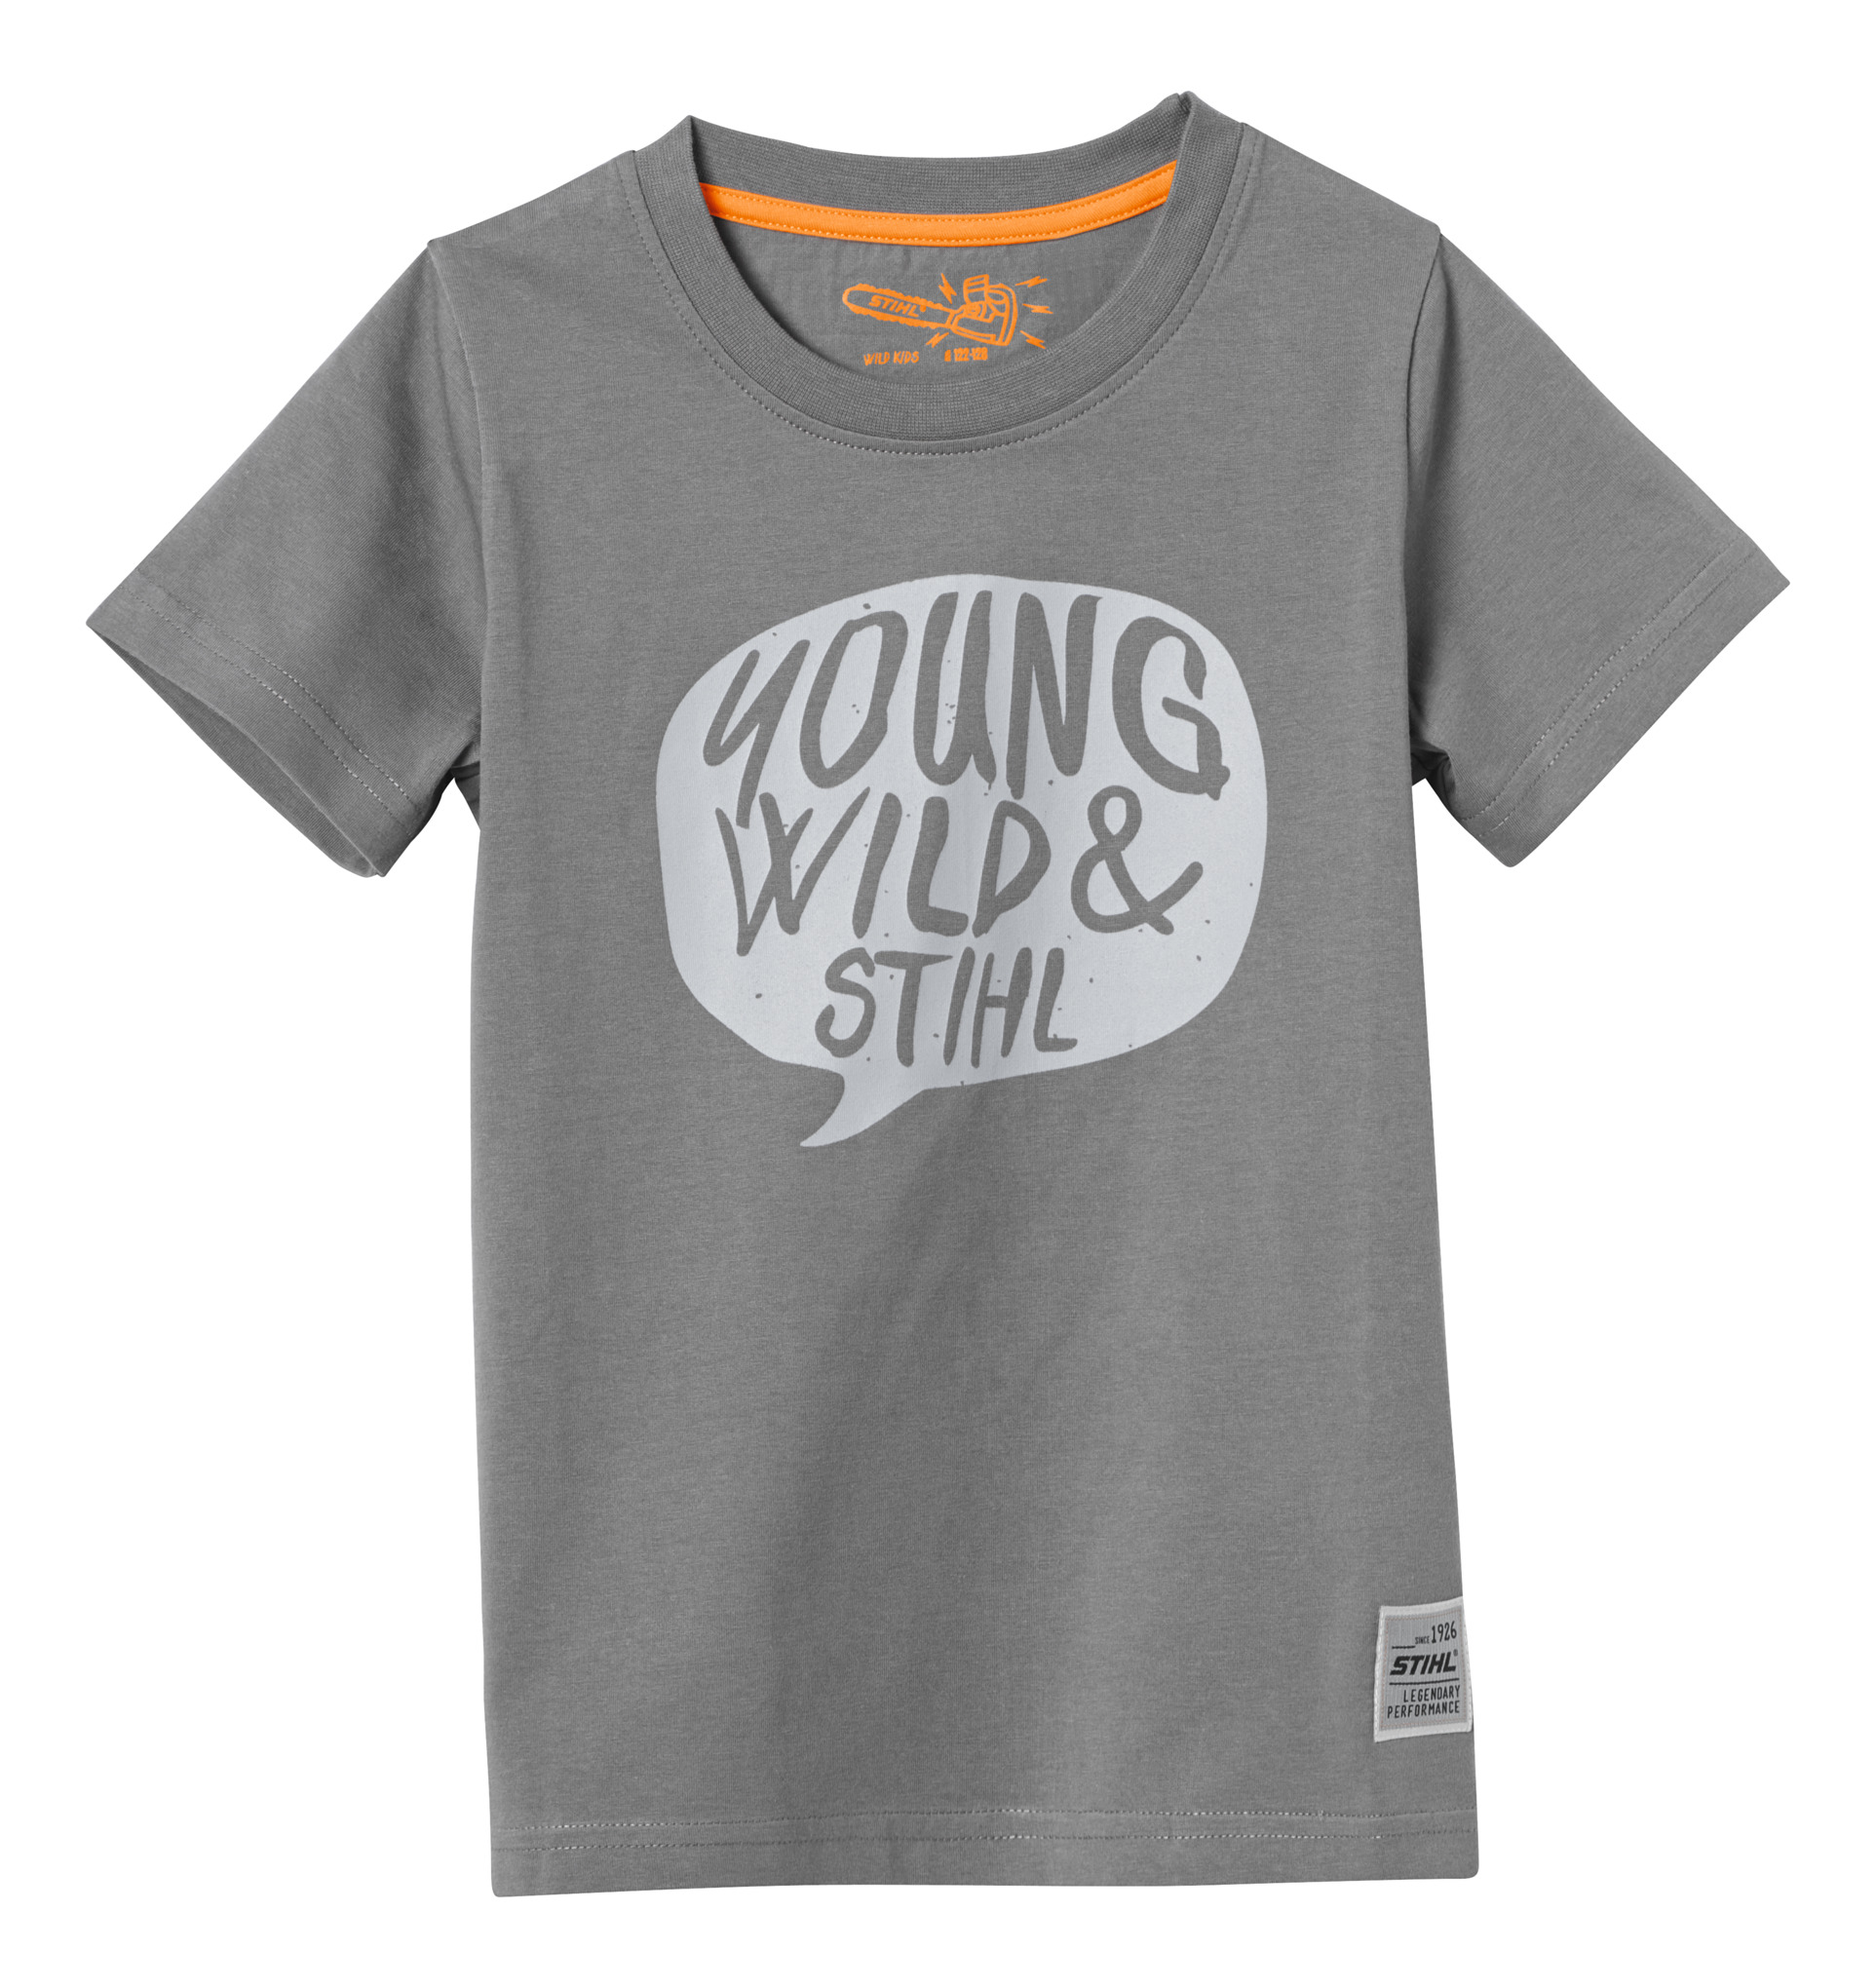 "YOUNG WILD" t-shirt “